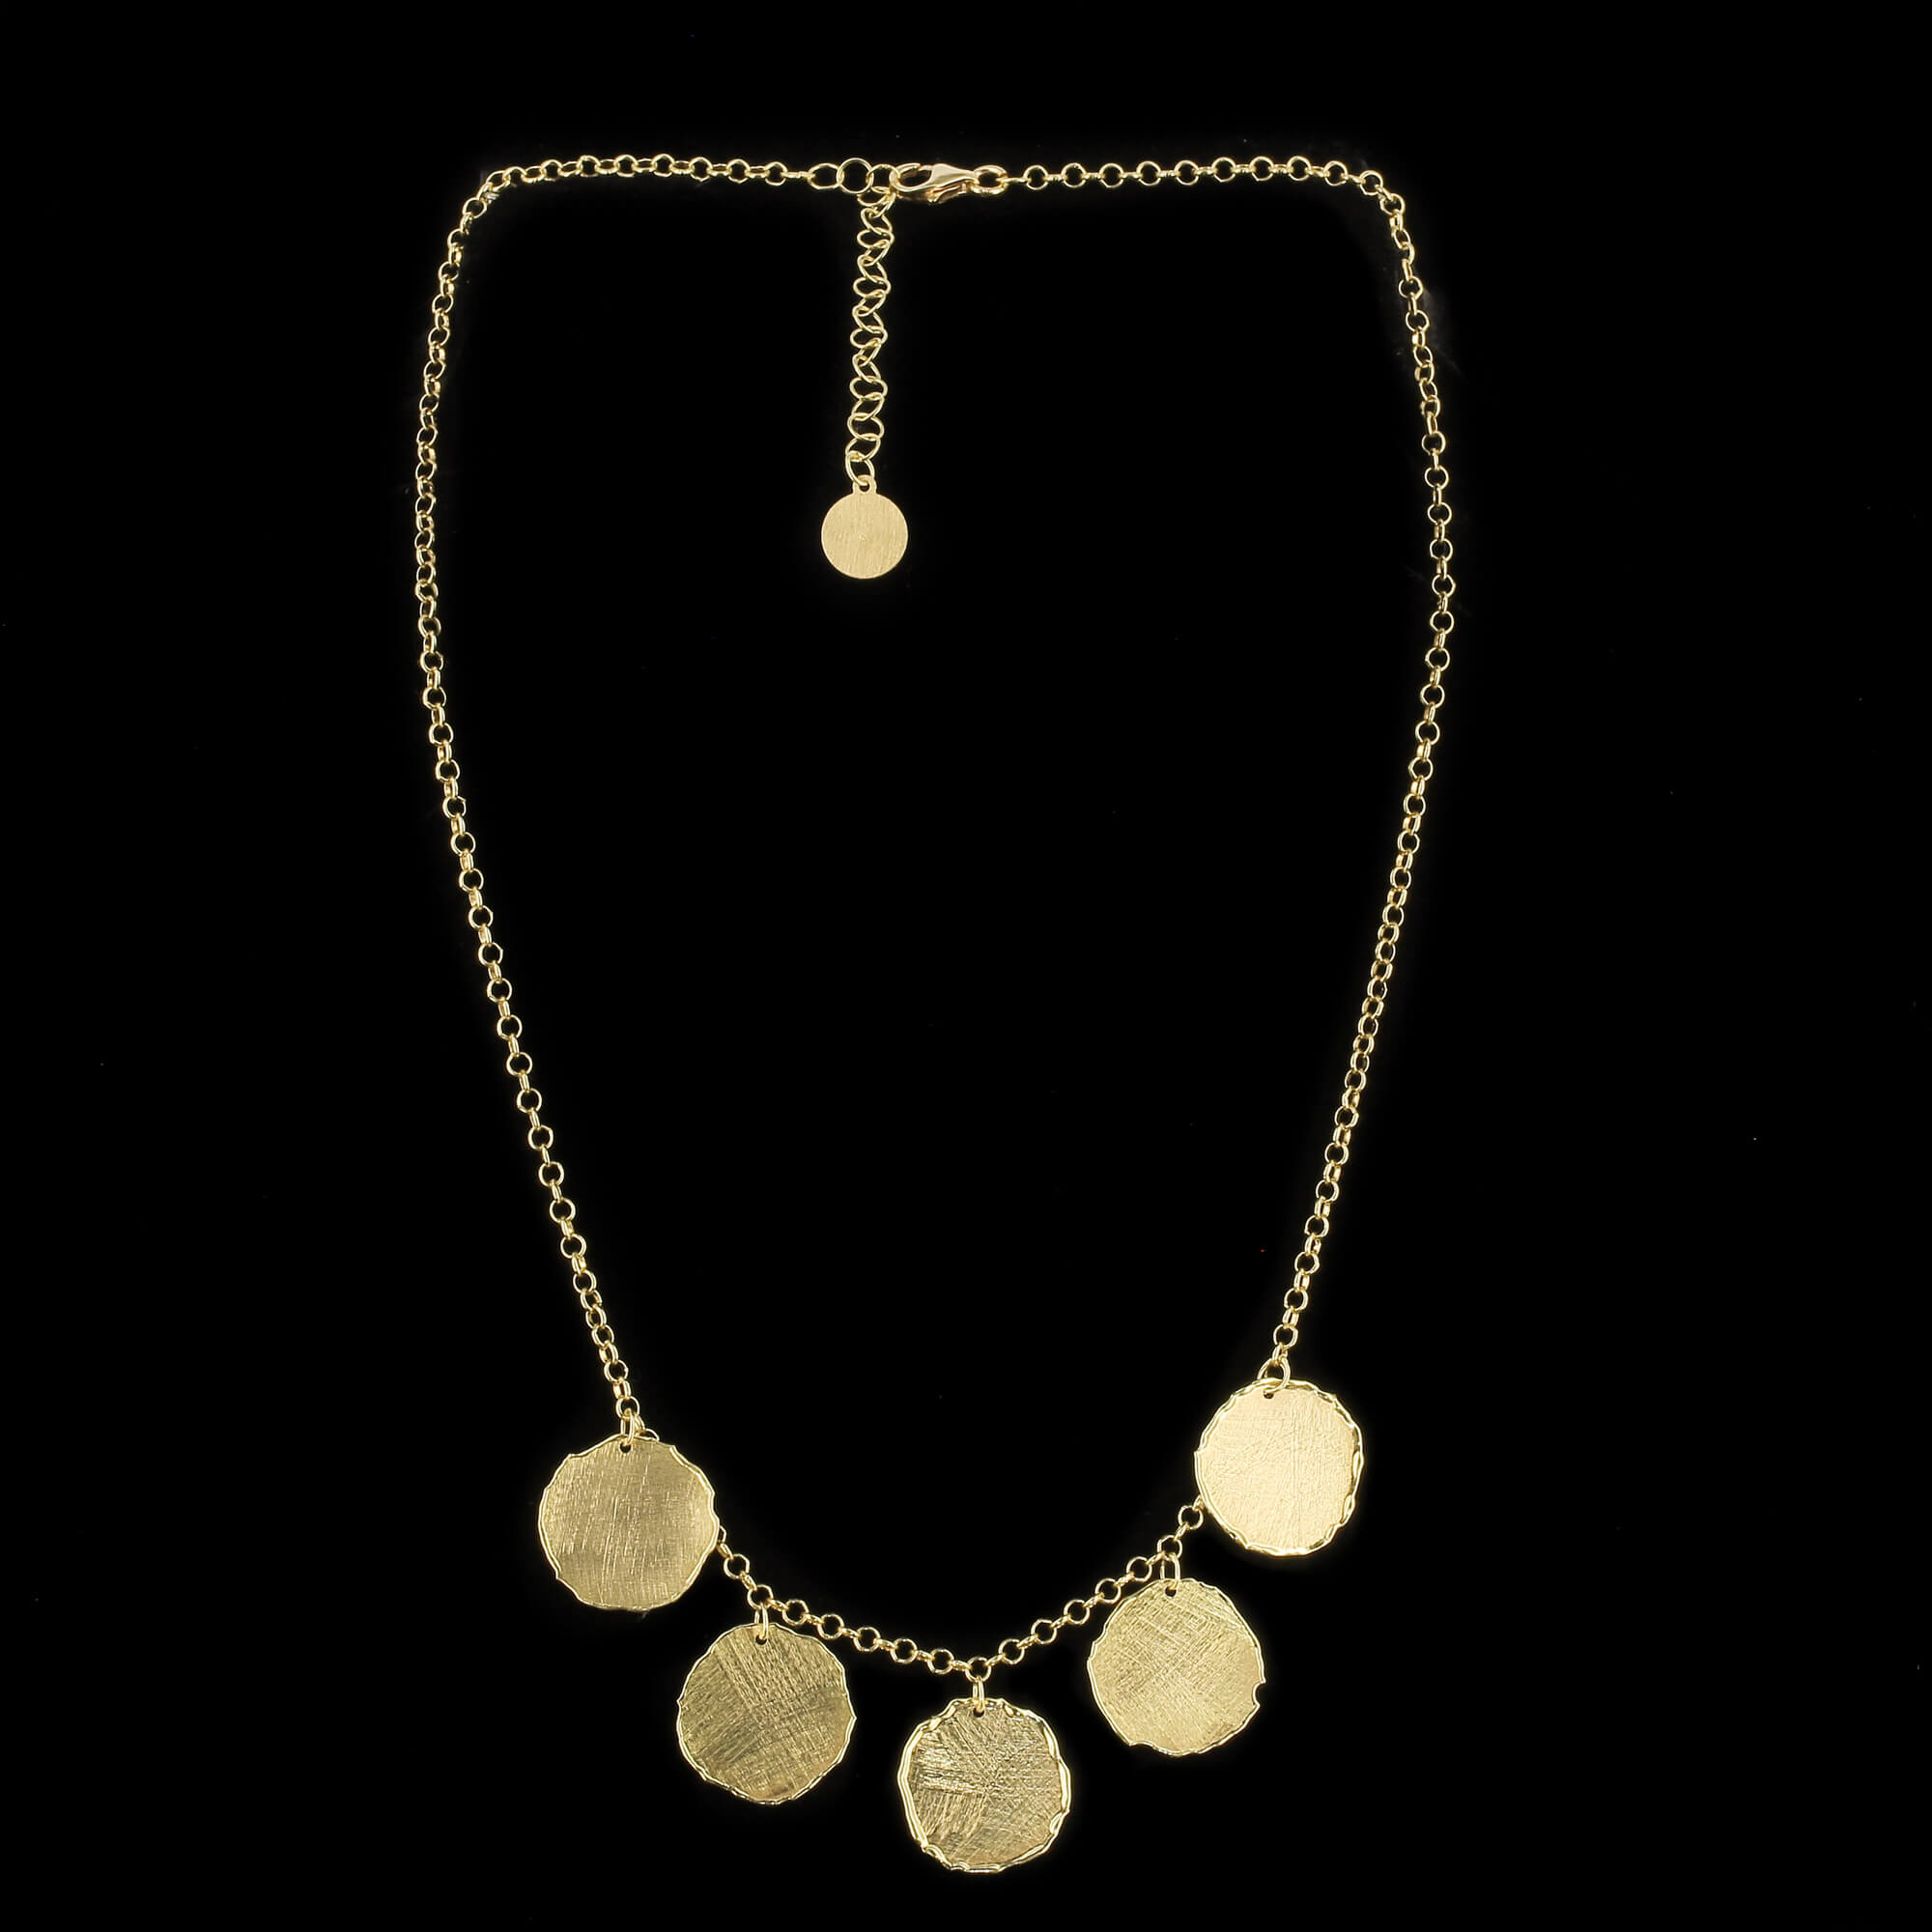 Golden link chain with round pendants; 18kt